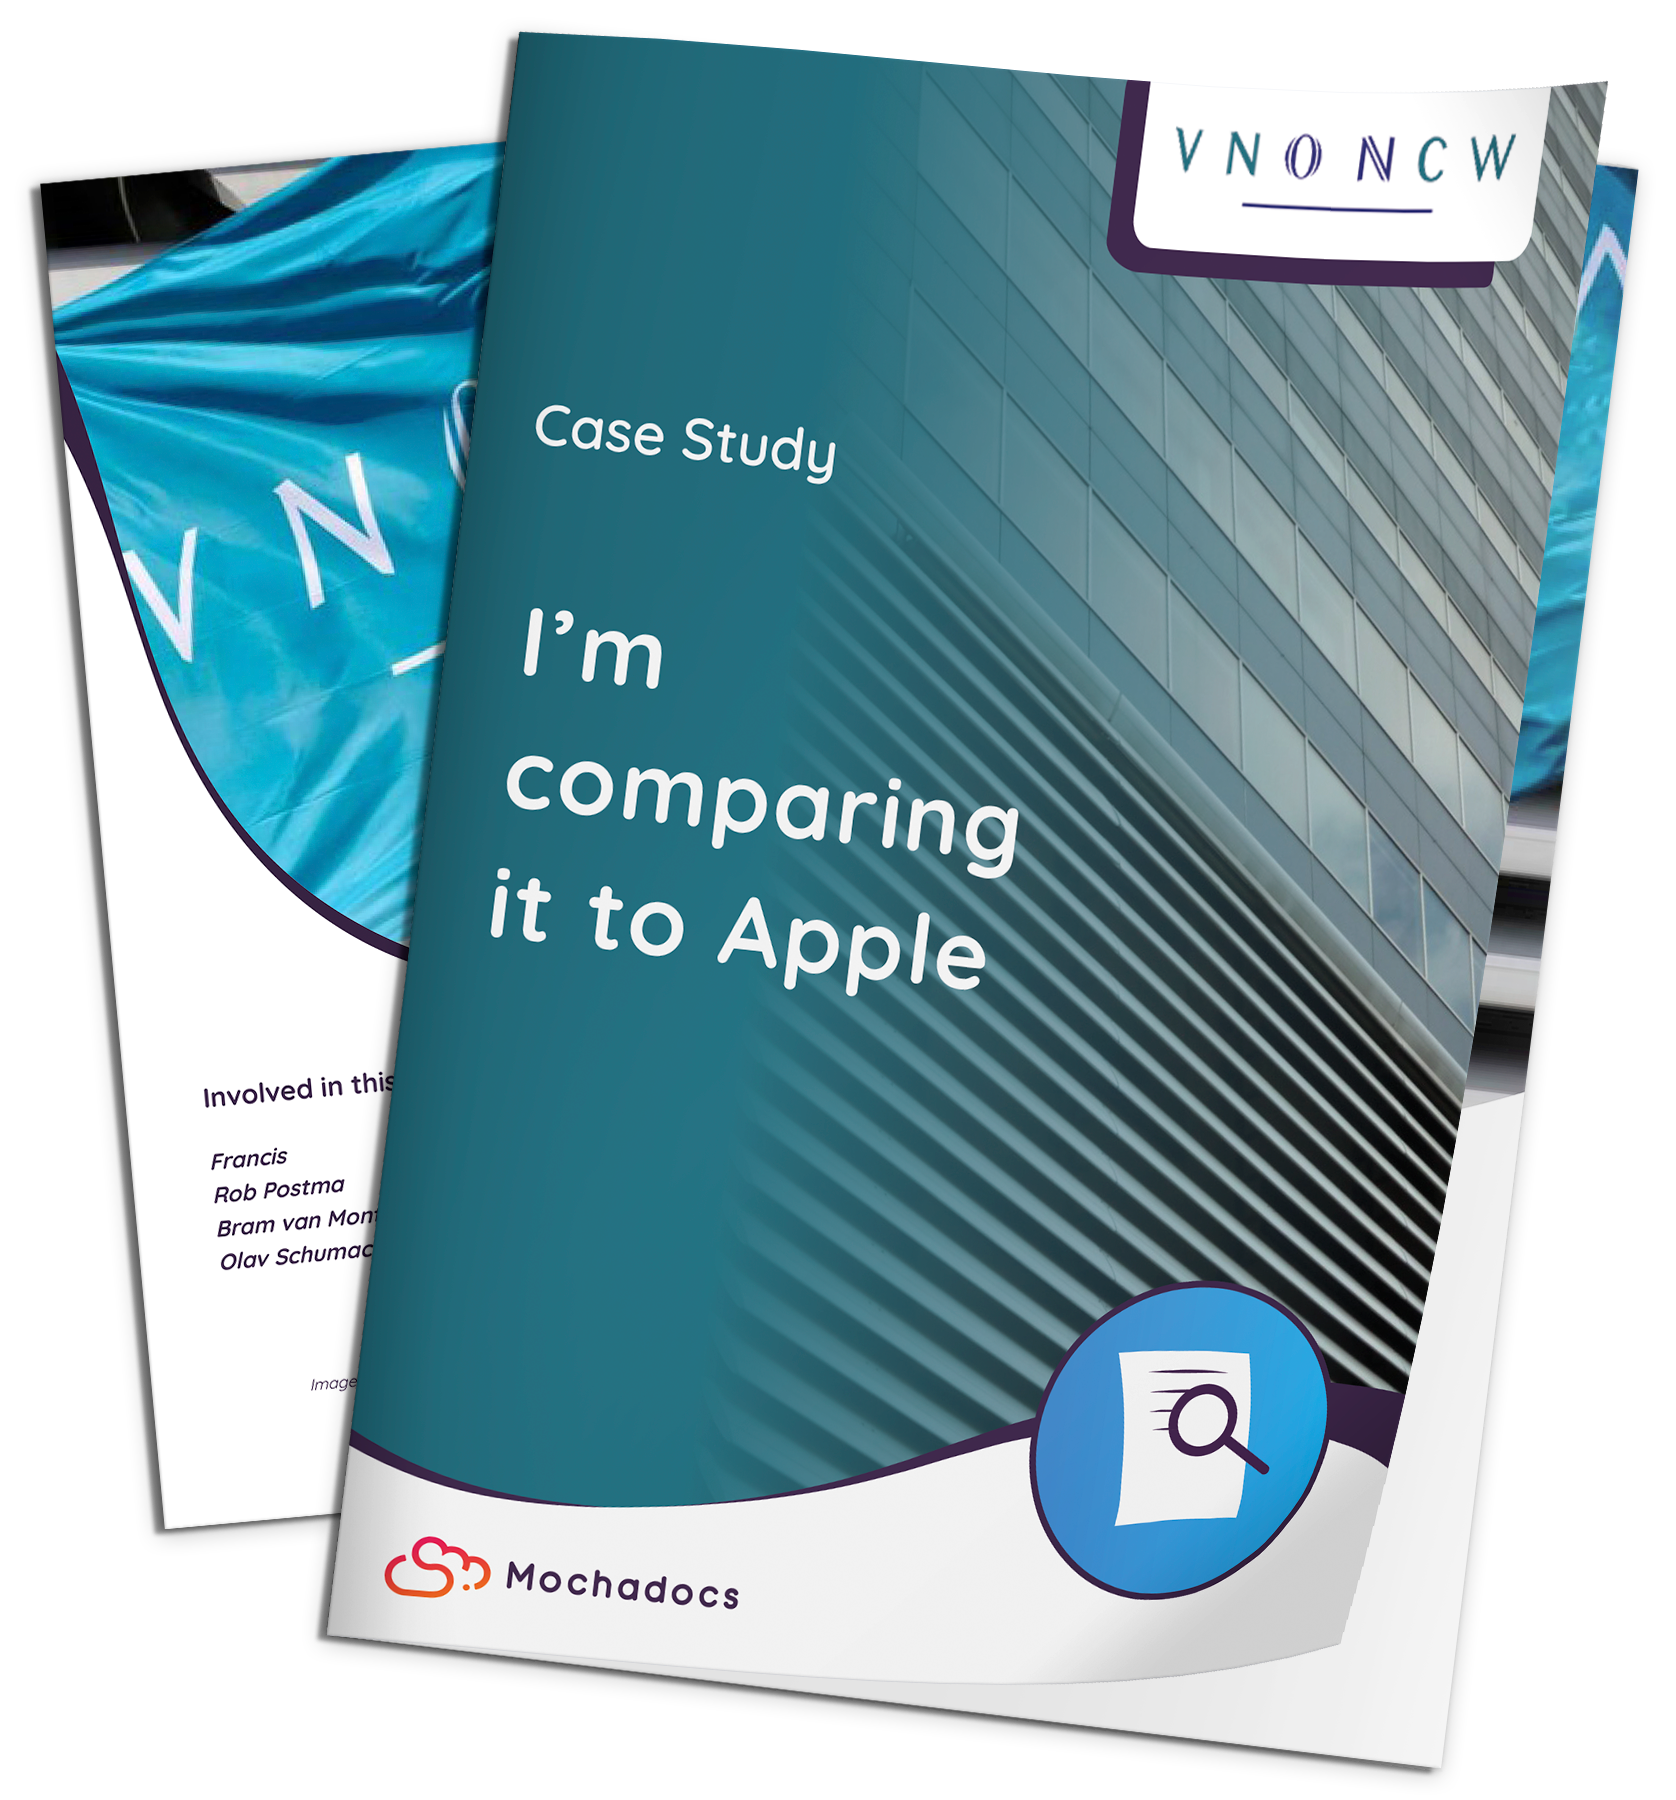 Mochadocs - Contract Management - Case Study - VNO-NCW - I'm comparing it to Apple